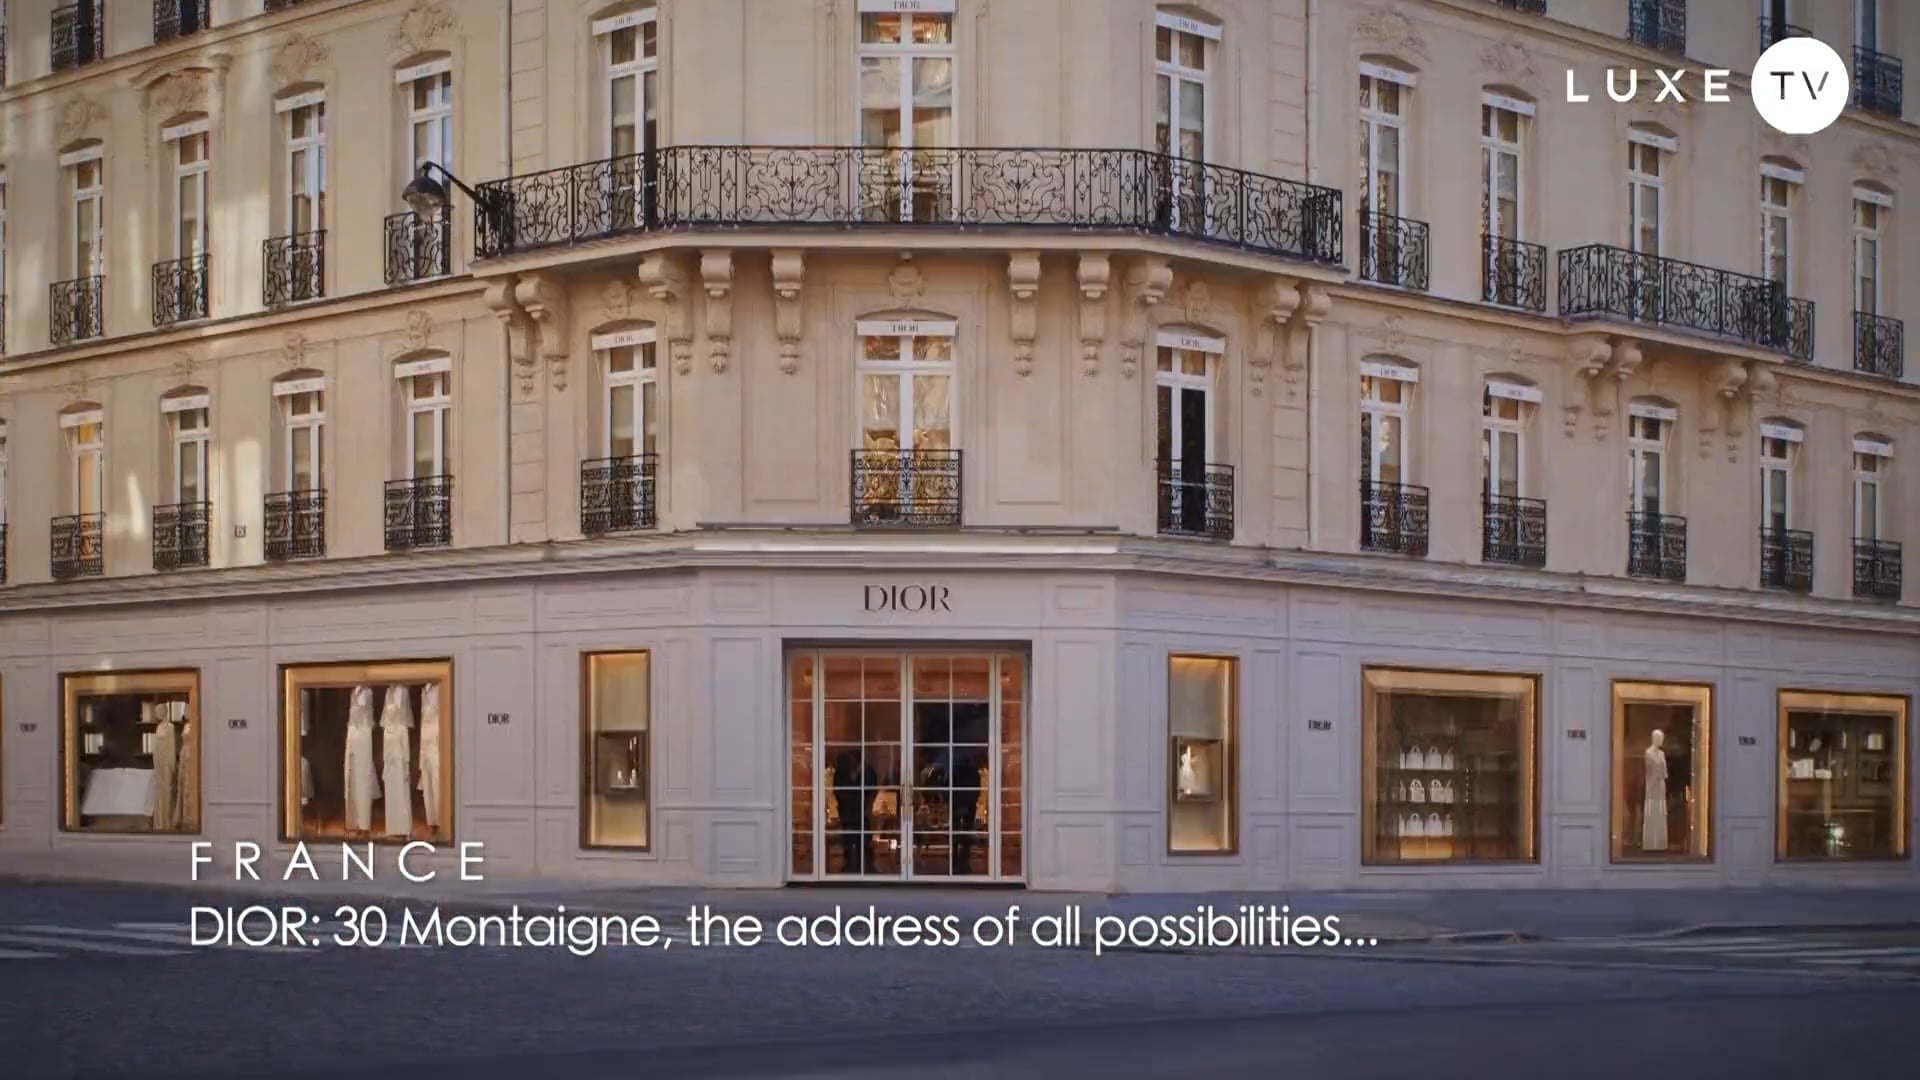 DIOR: 30 Montaigne, the address of all possibilities - Vimeo thumbnail